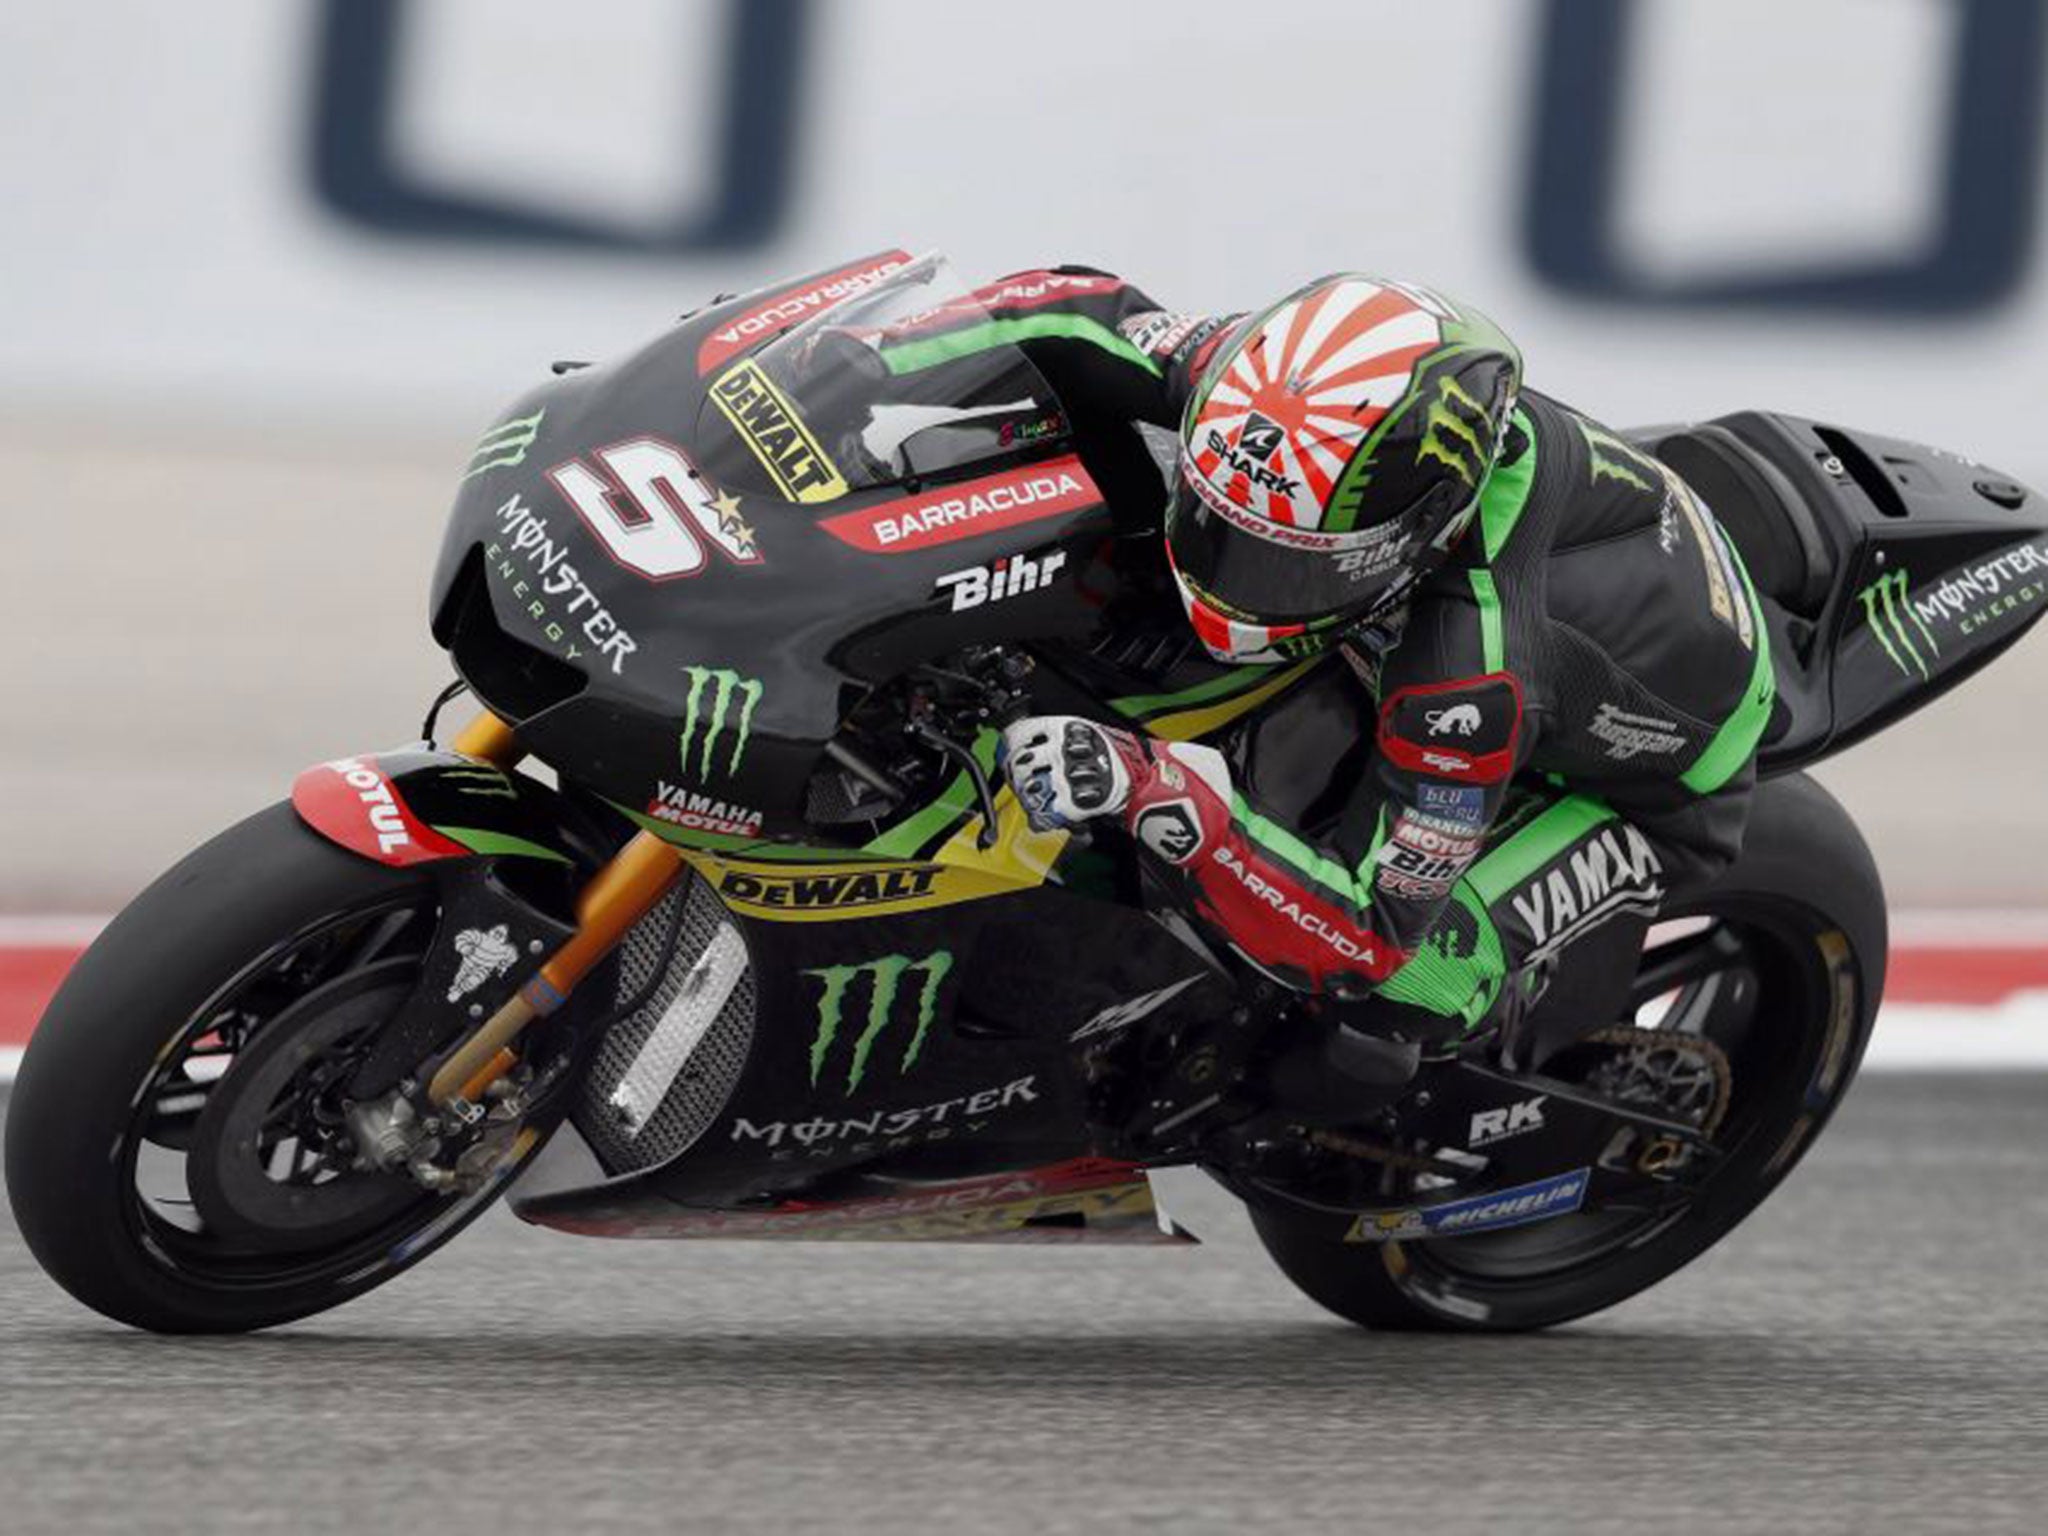 Zarco eventually went on to finish fifth